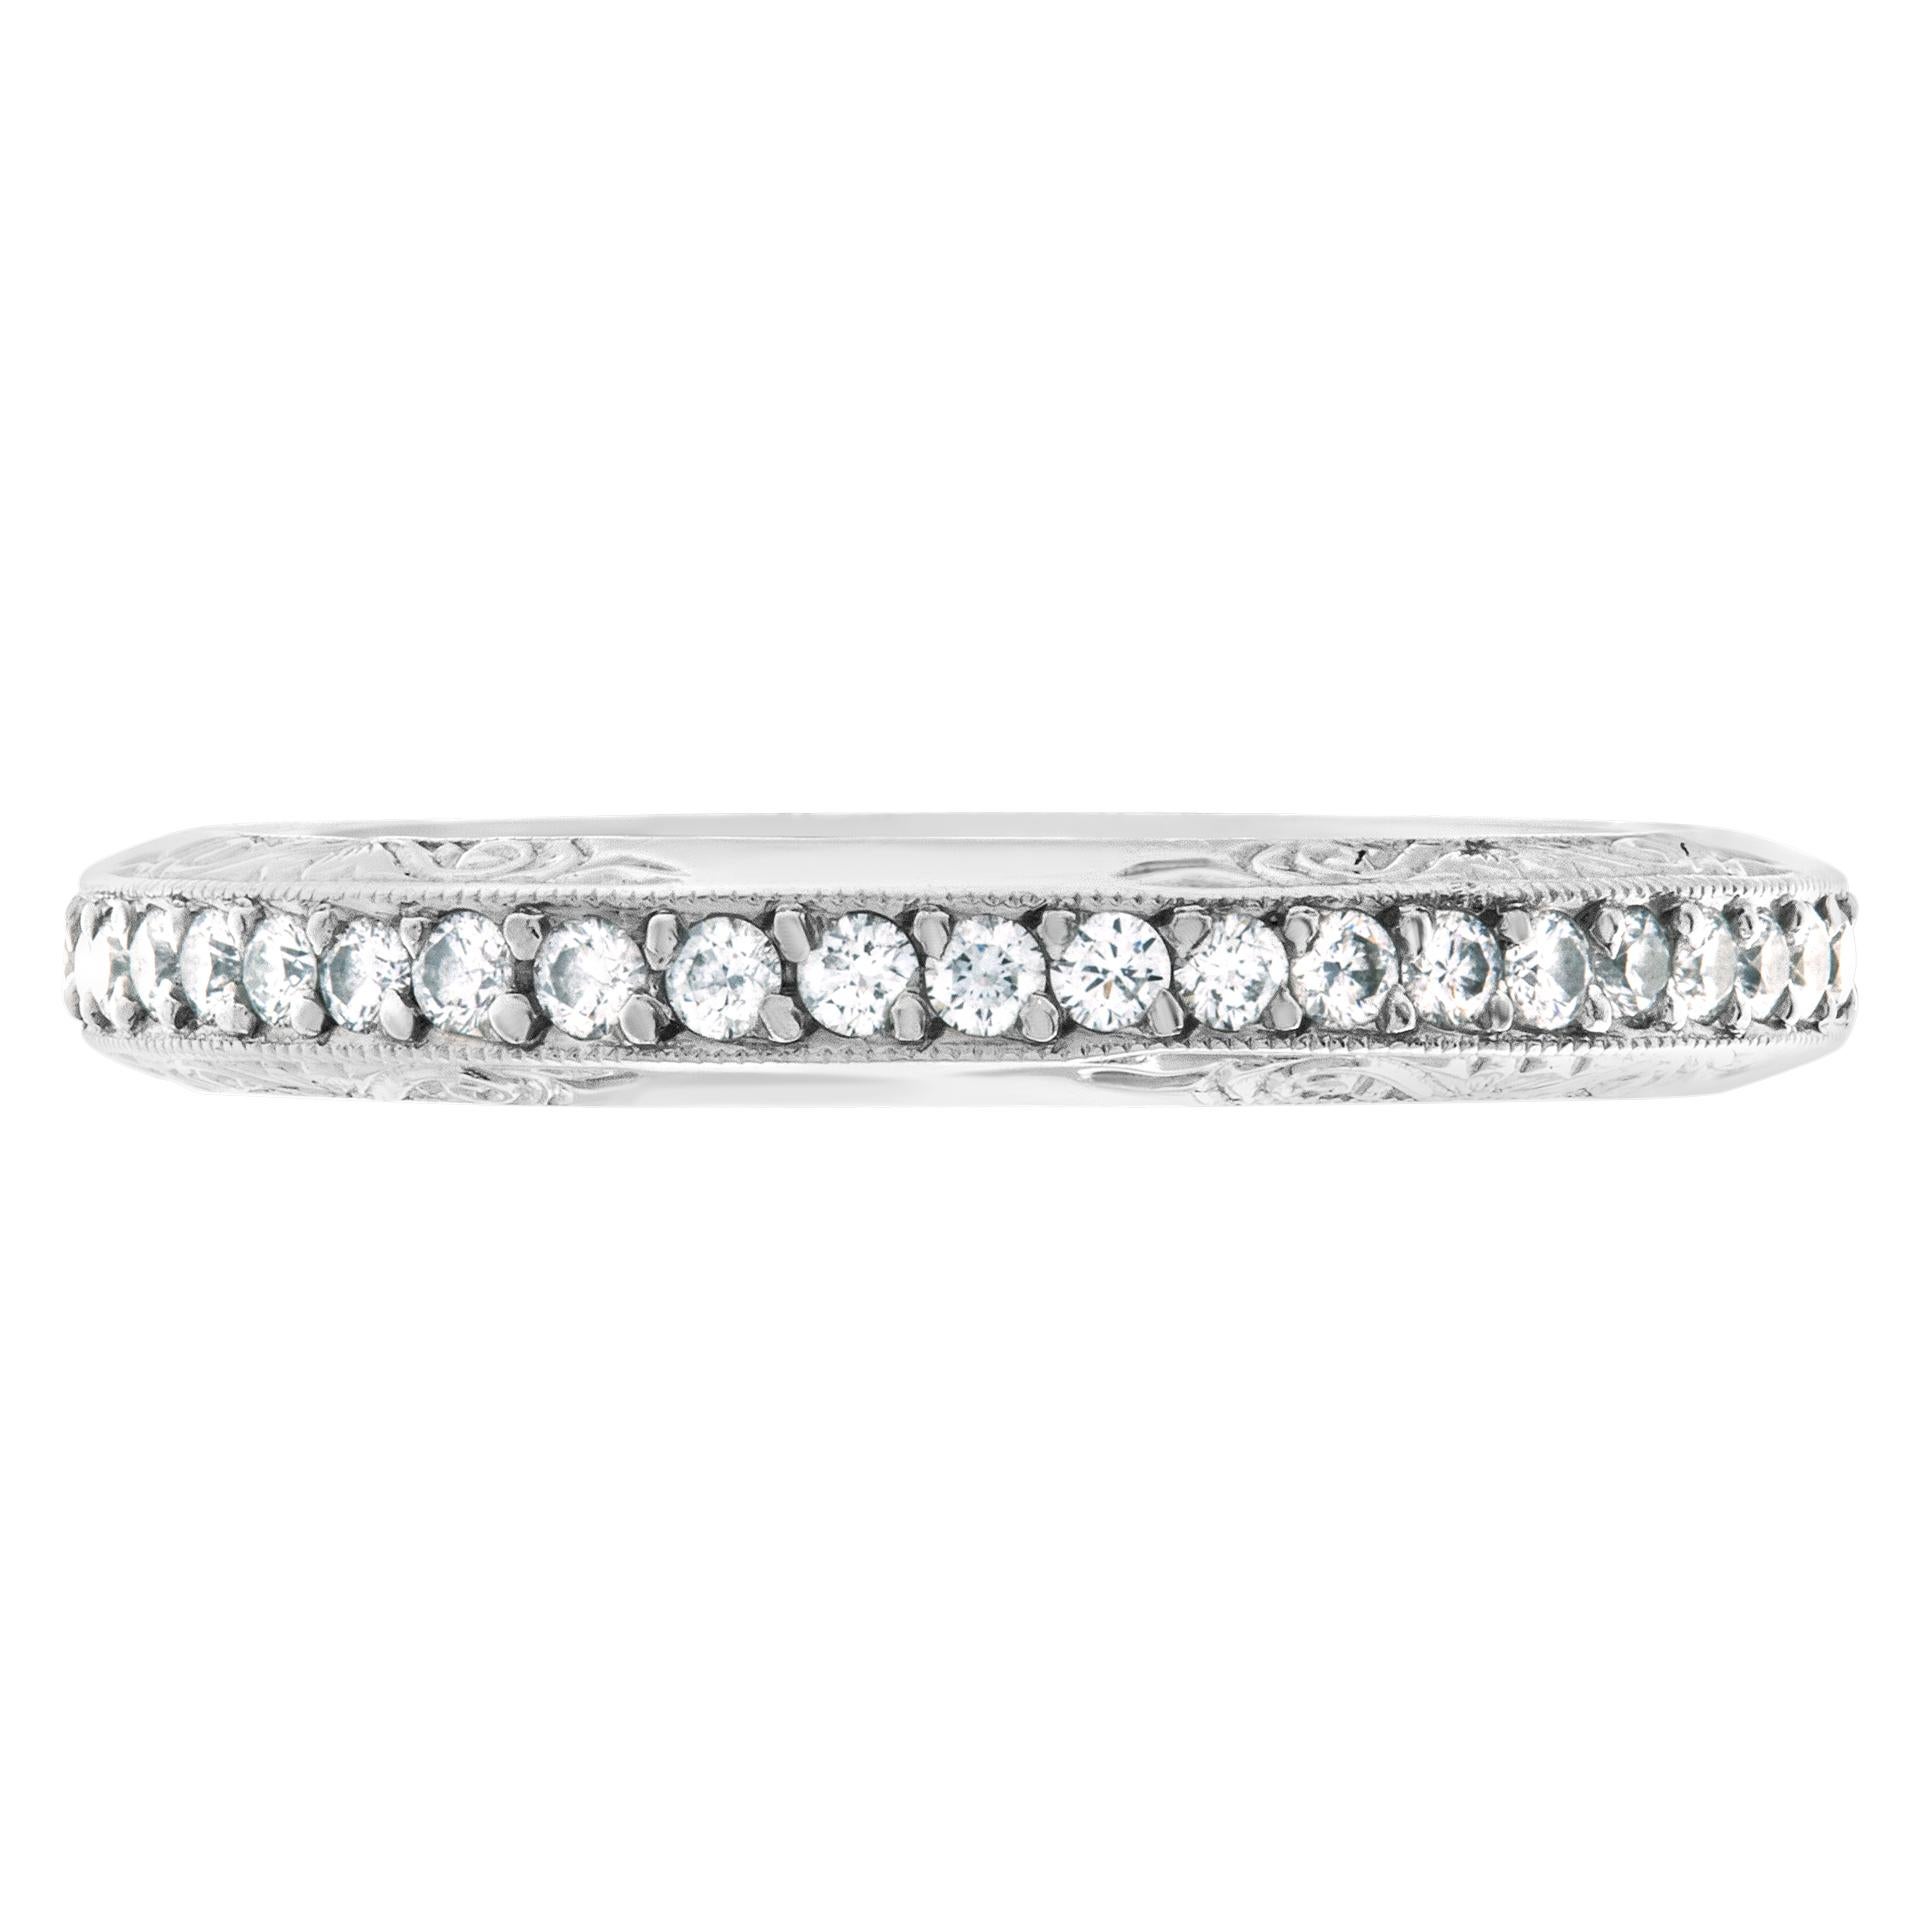 Michael Beaudry Platinum Diamond Eternity Band and Ring  with 0.44 carats in diamonds. Width: 3.0mm. Size 6.5.
